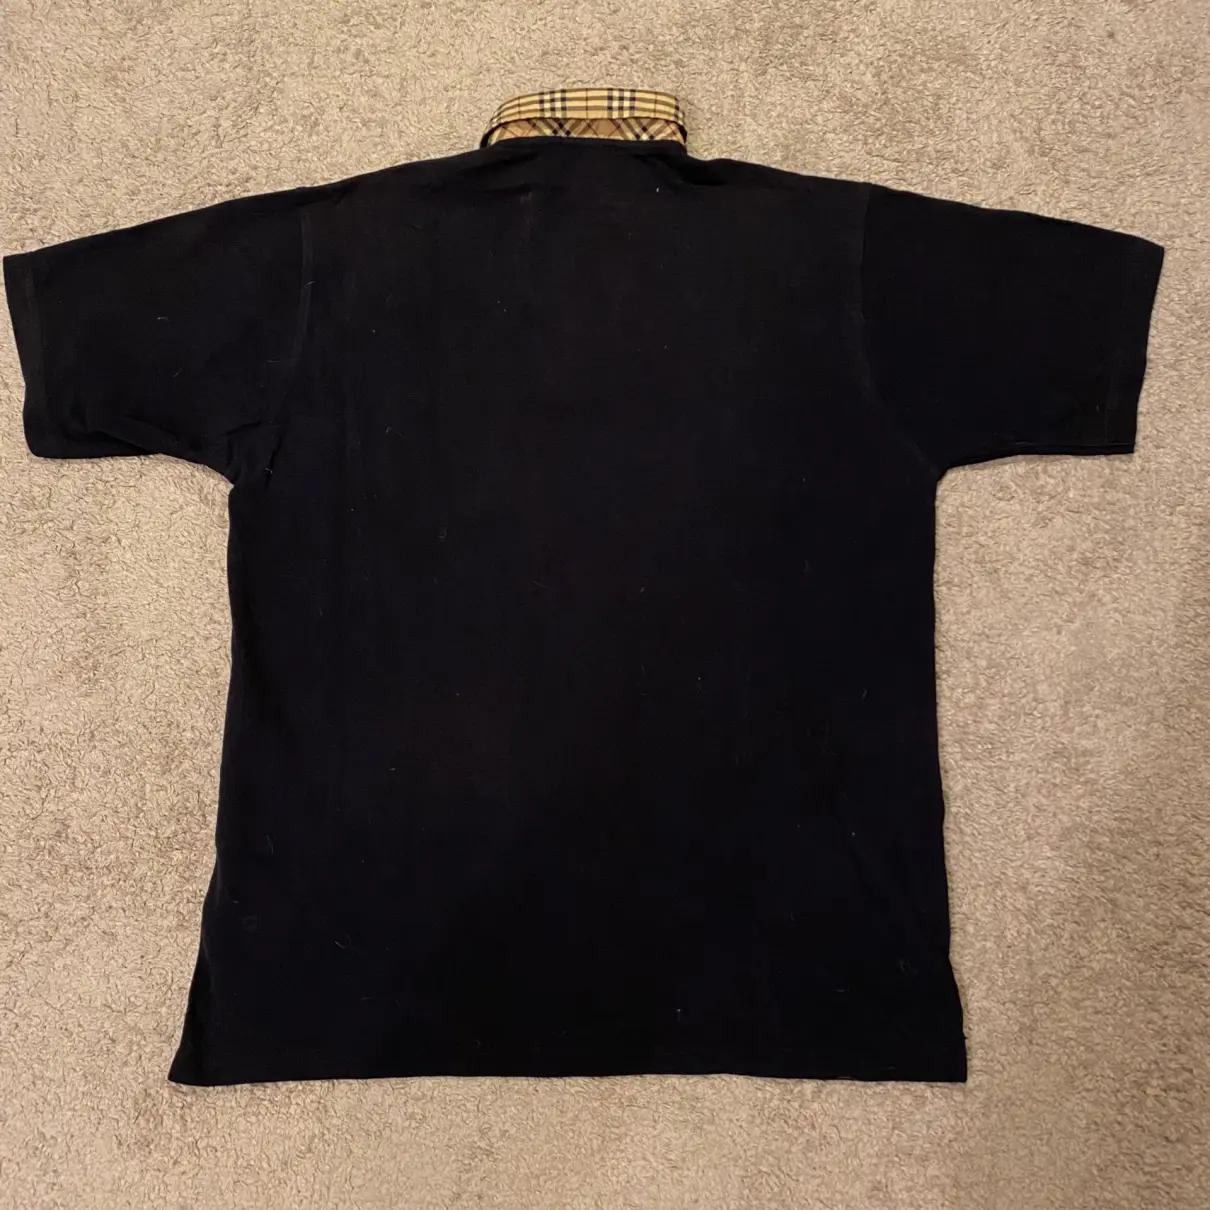 Buy Burberry Polo shirt online